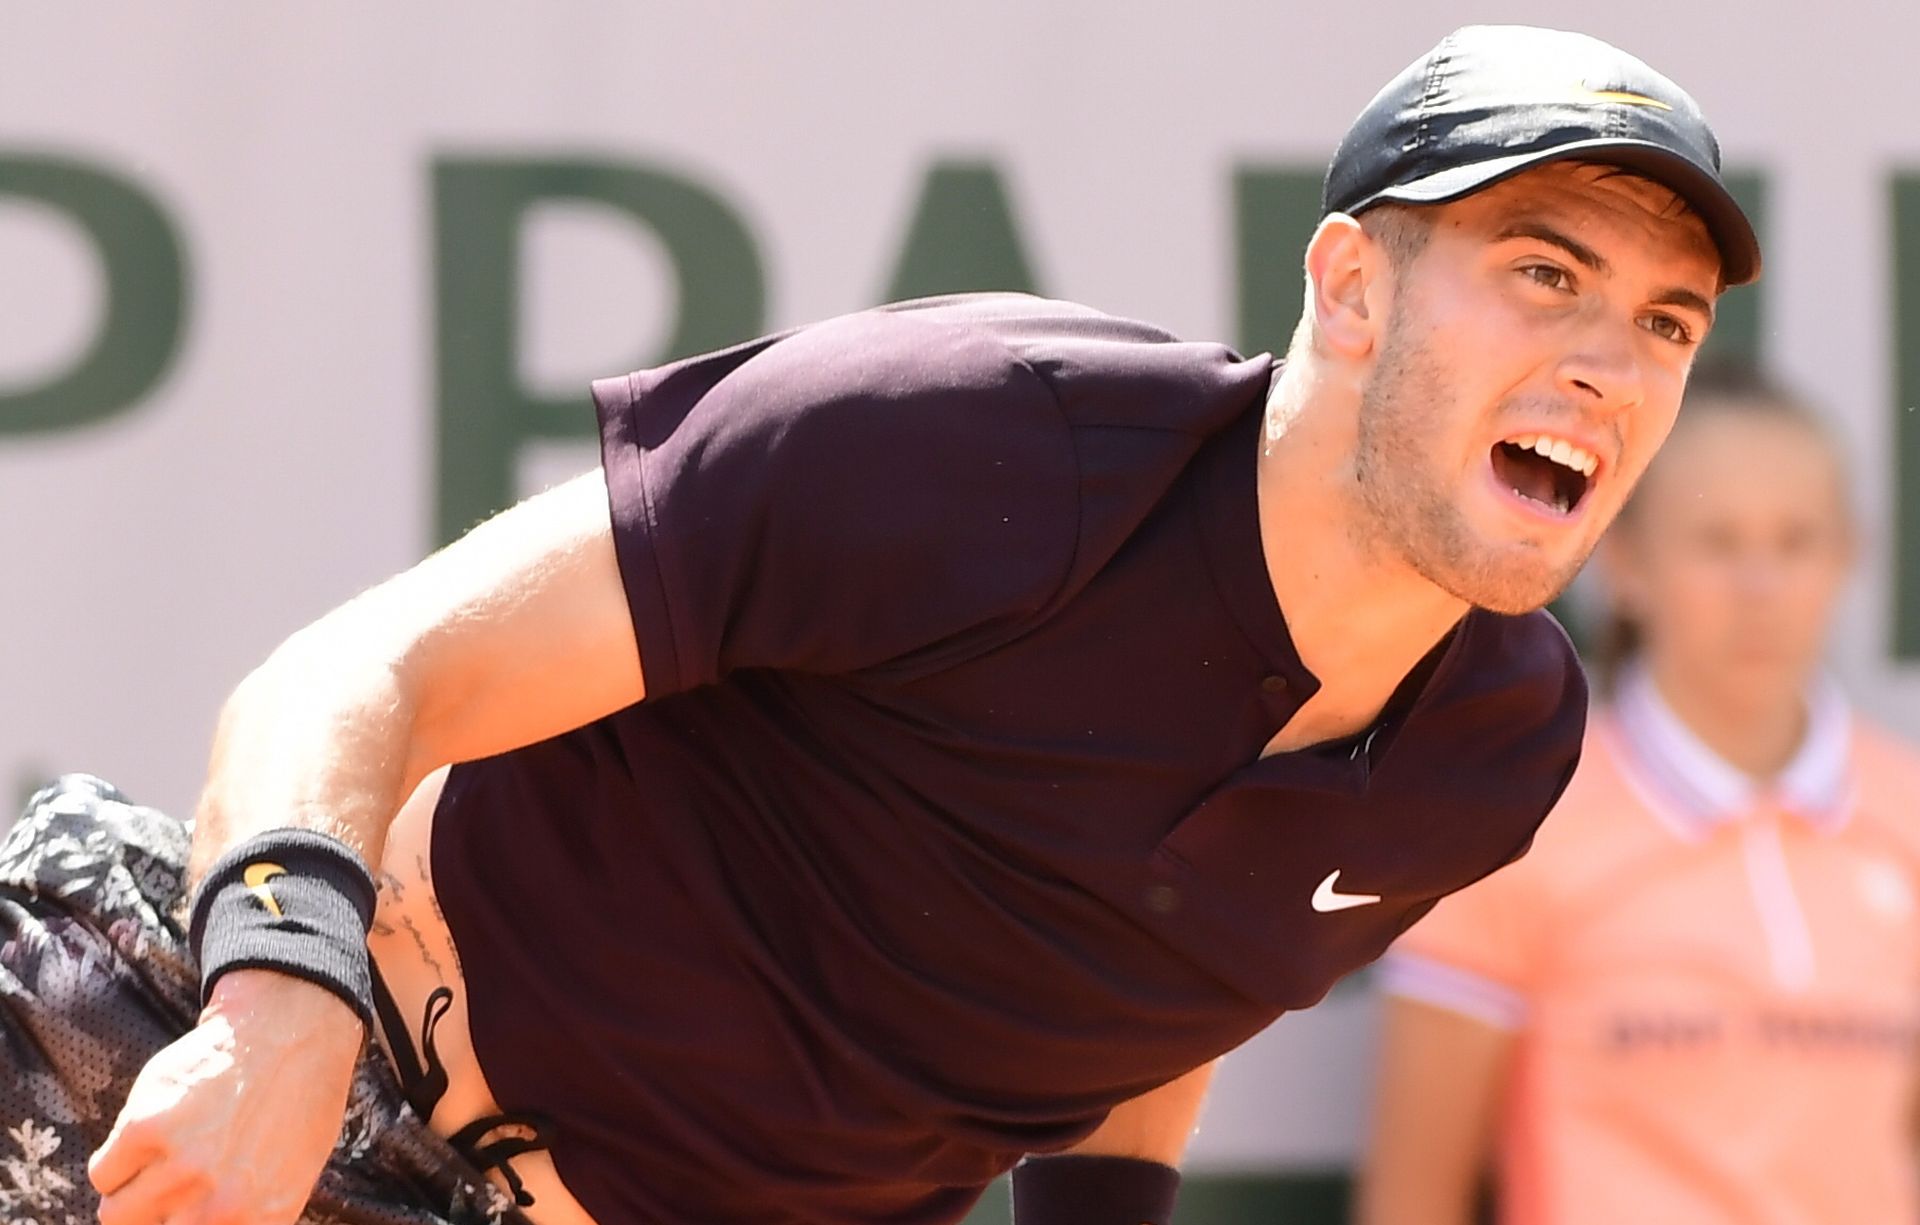 epa07605905 Borna Coric of Croatia plays Aljaz Bedene of Britain during their men’s first round match during the French Open tennis tournament at Roland Garros in Paris, France, 27 May 2019.  EPA/CAROLINE BLUMBERG